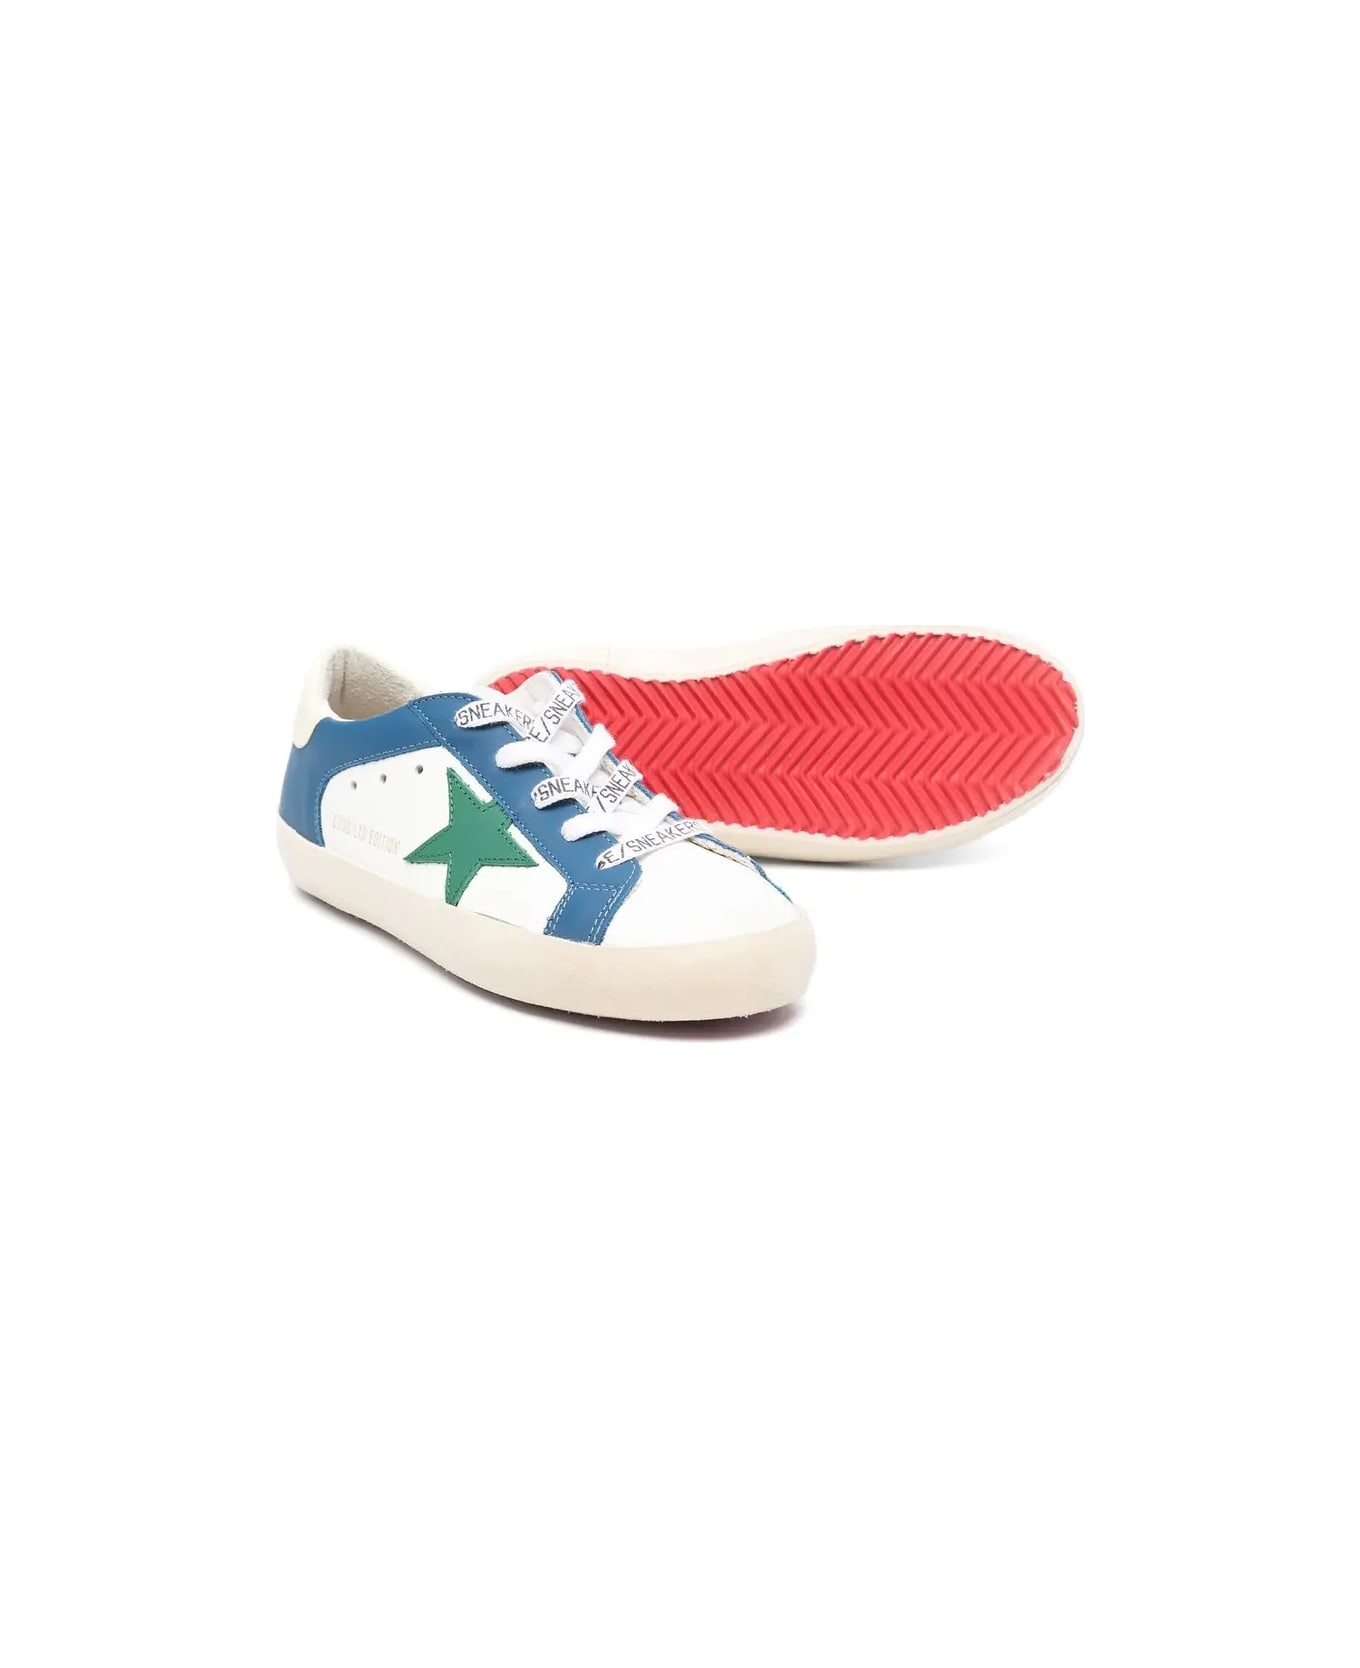 Bonpoint X Golden Goose Sneakers In Northern Blue - Blue